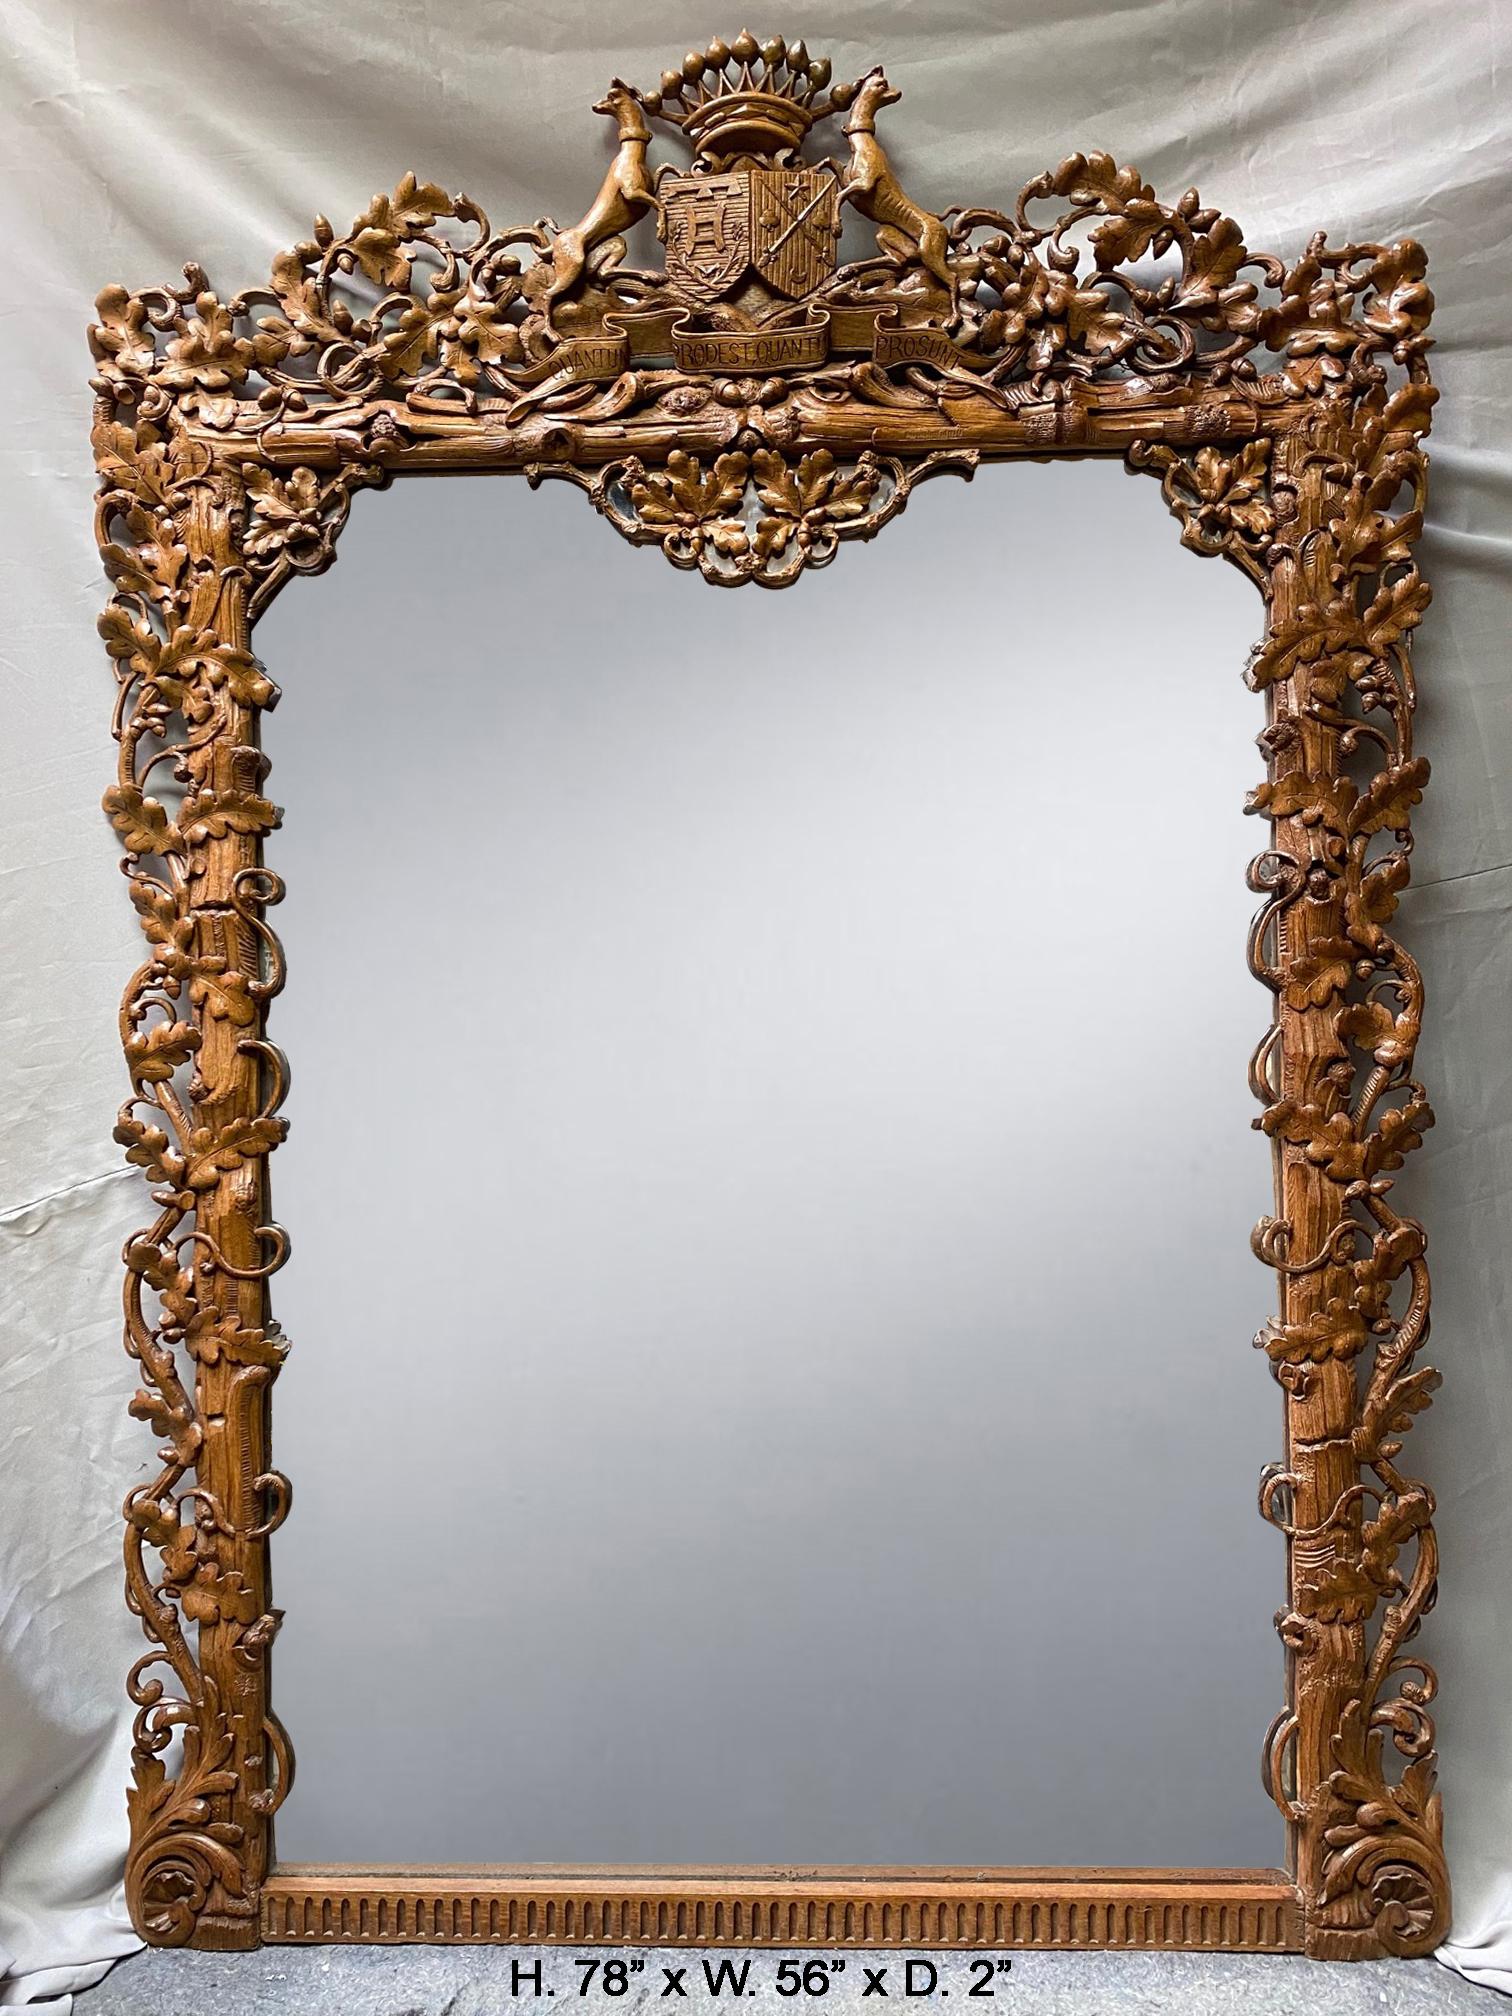 Sensational unique 19th century English hand carved oak mirror
The mirror is surmounted with a hand carved foliate-inspired cresting centered by a coat of arms flanked by two hound dogs and topped with a crown, above the original rectangular mirror